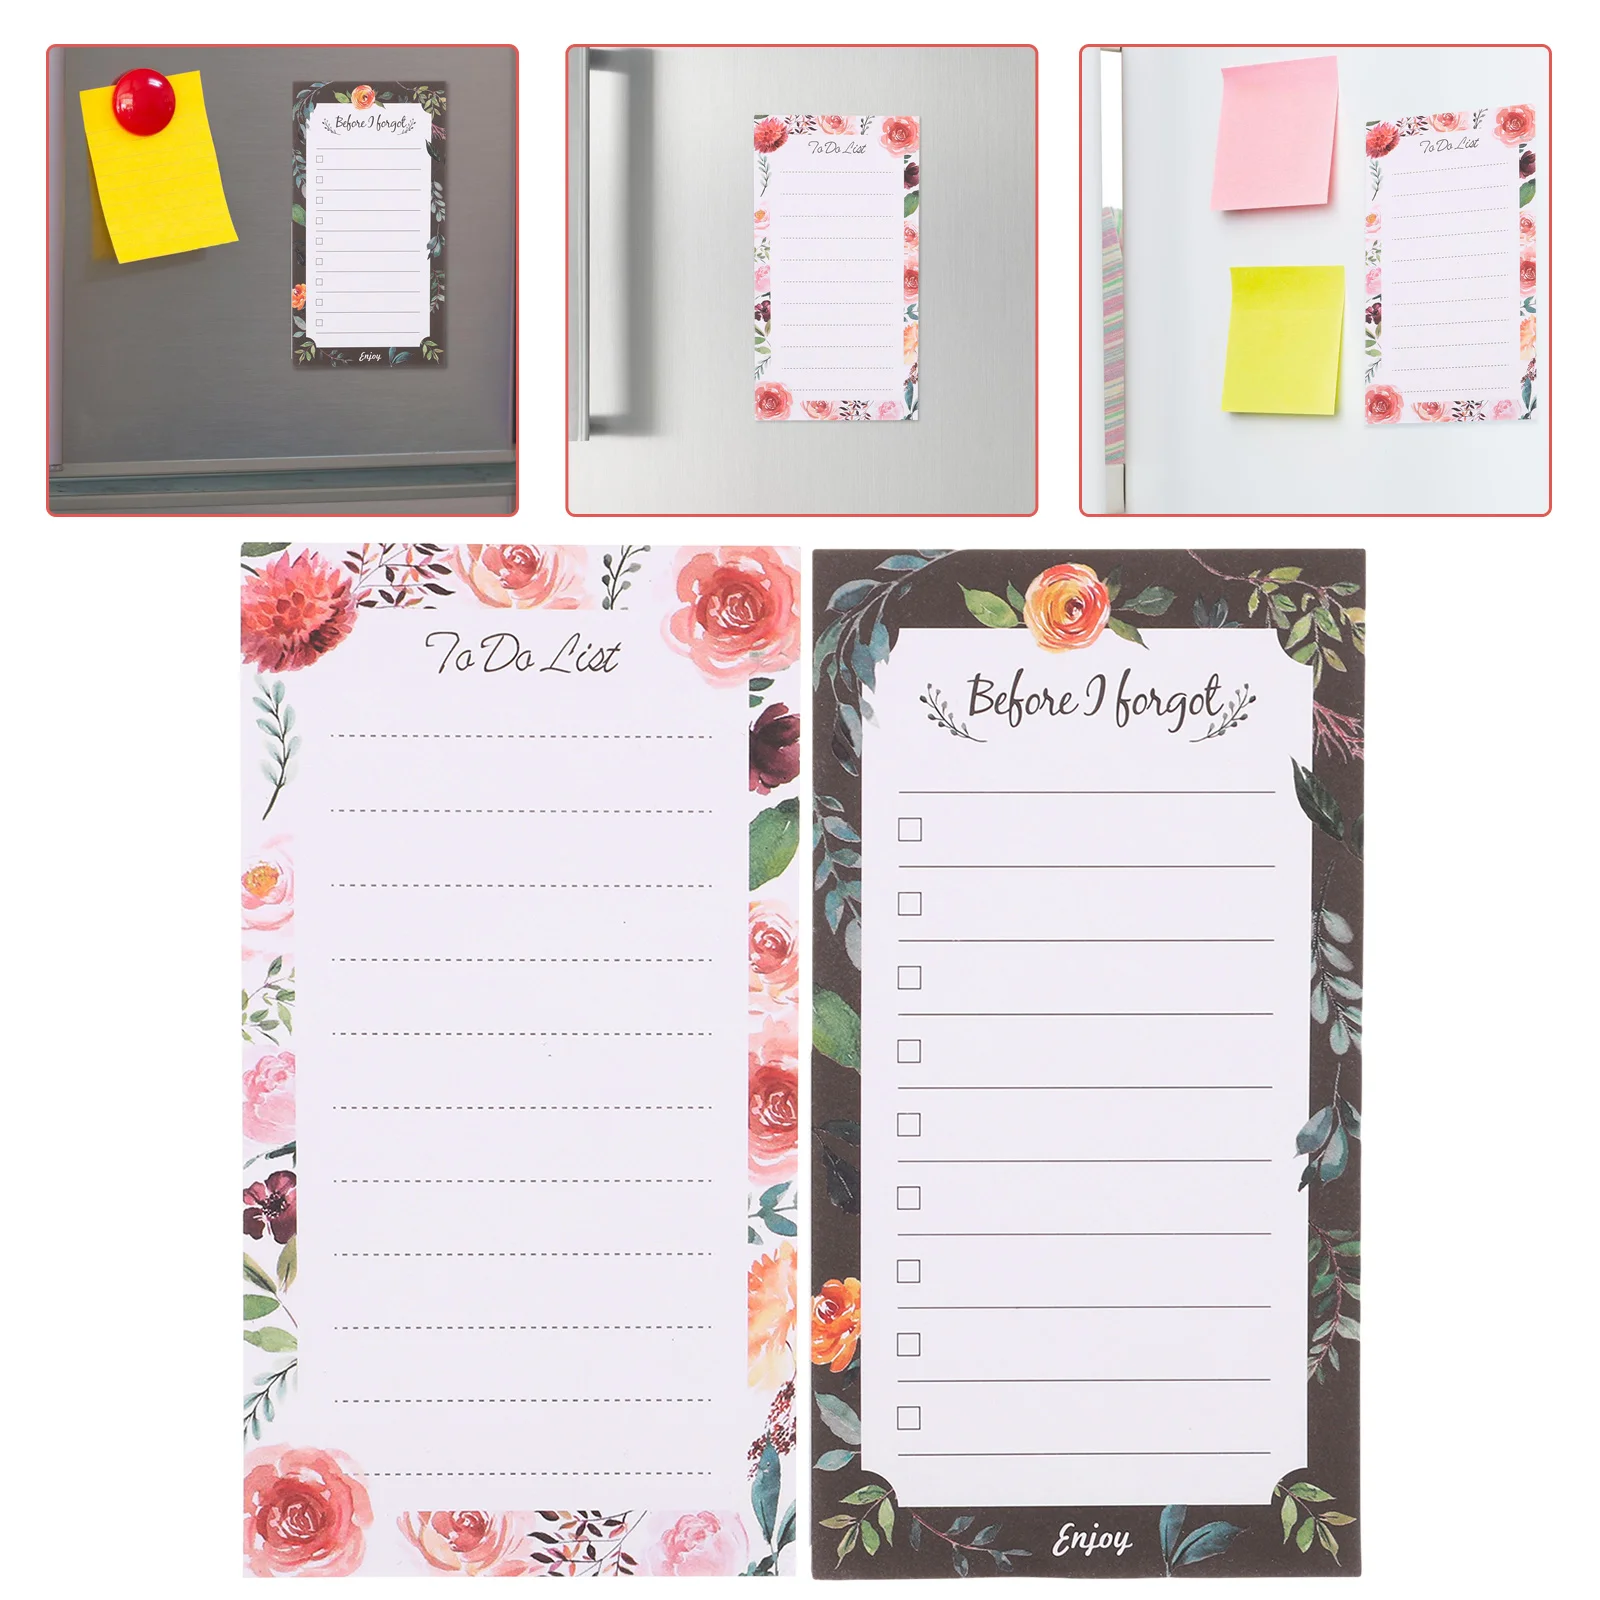 2 Pcs Fridge Magnetic Notepad Pads Grocery List Sticky Shopping Notepads to Do with 3 books memo pad fridge magnetic notepad to do list notepad fridge magnetic backing note pads